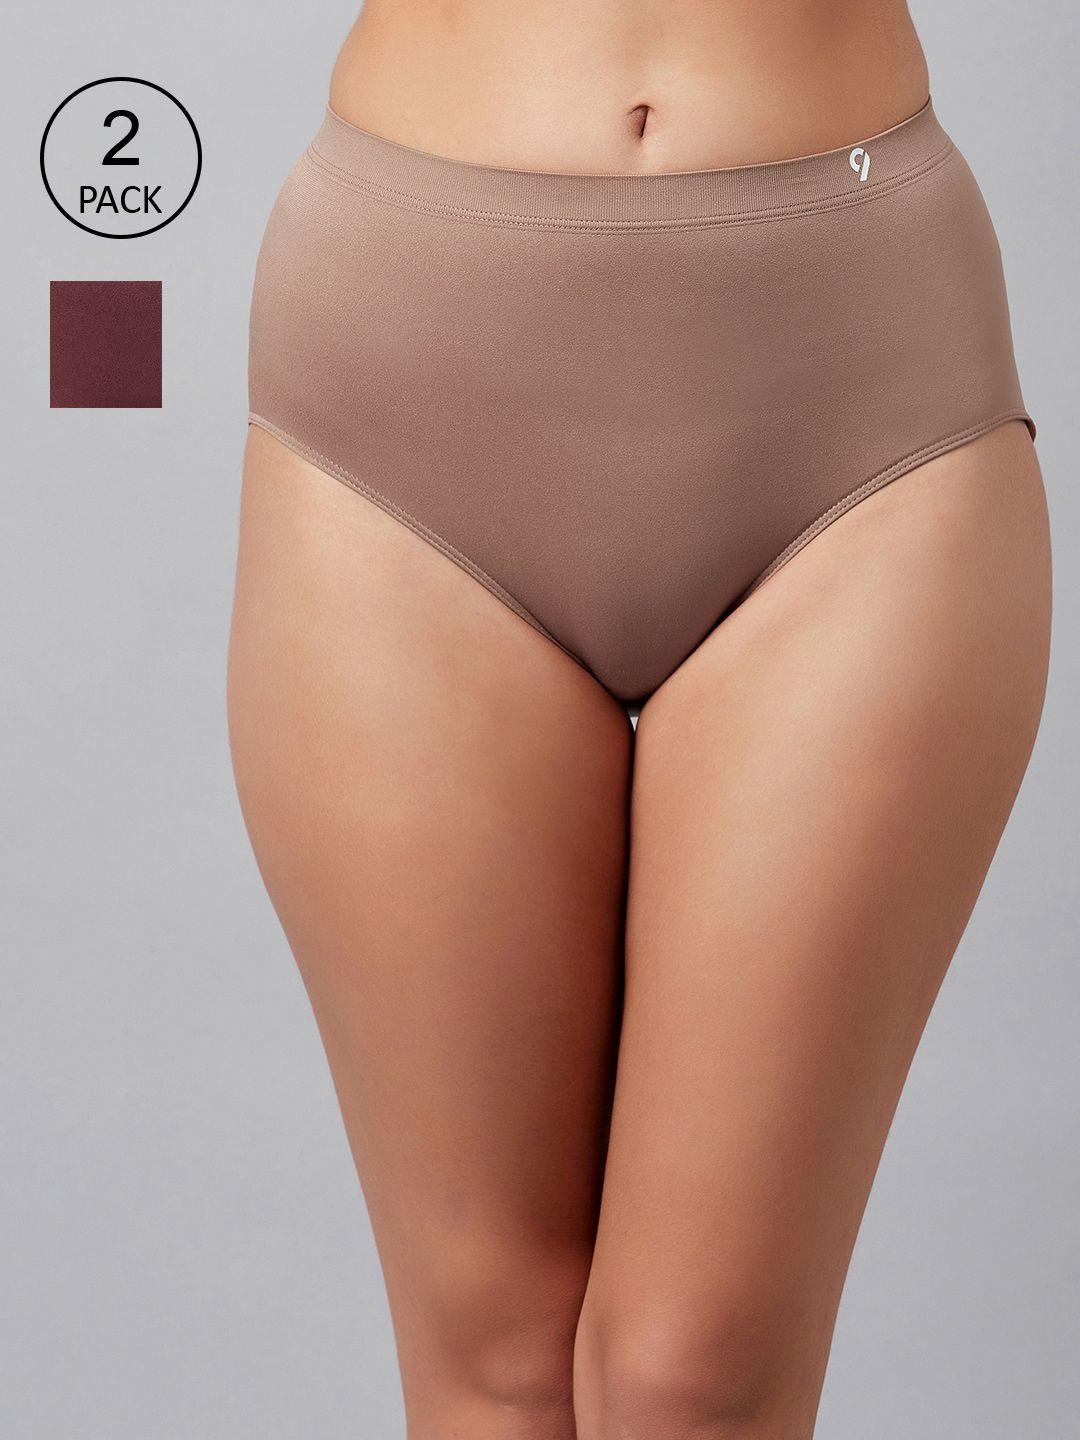 c9 airwear women pack of 2 maroon and brown seamless hipster briefs